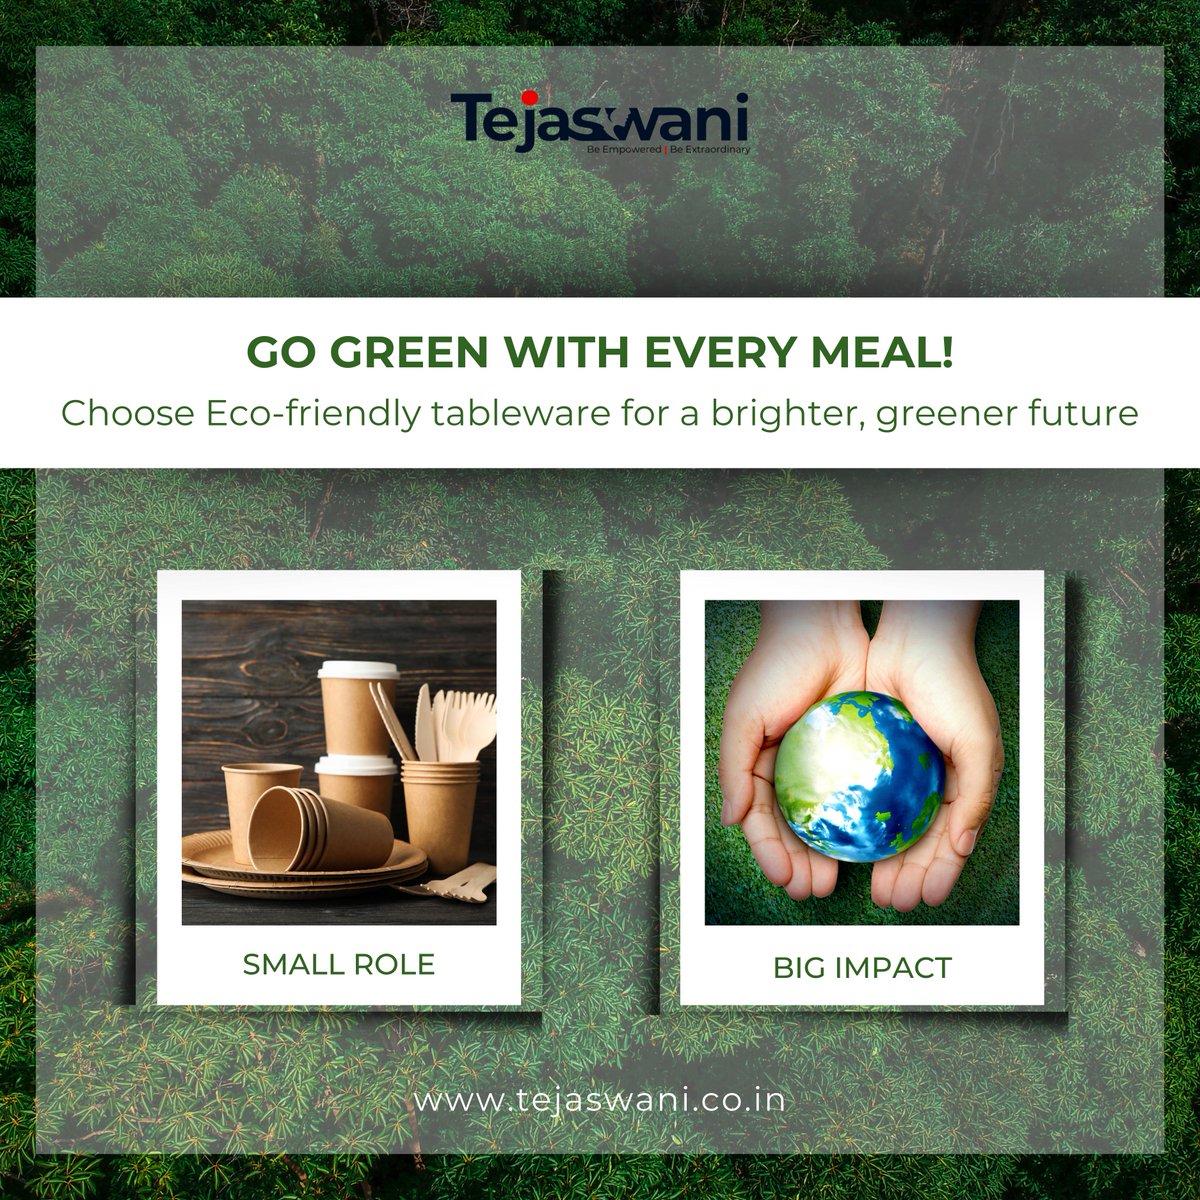 Embrace a Greener Dining Experience!🌿Opt for ecofriendly tableware to reduce #plasticwaste & support #sustainable production. Make every meal count!💚 

Join the #EcoFriendlyEating movement & share your tips with #GoGreenWithEveryMeal.🍽️ 

#sustainableeating #plasticfree